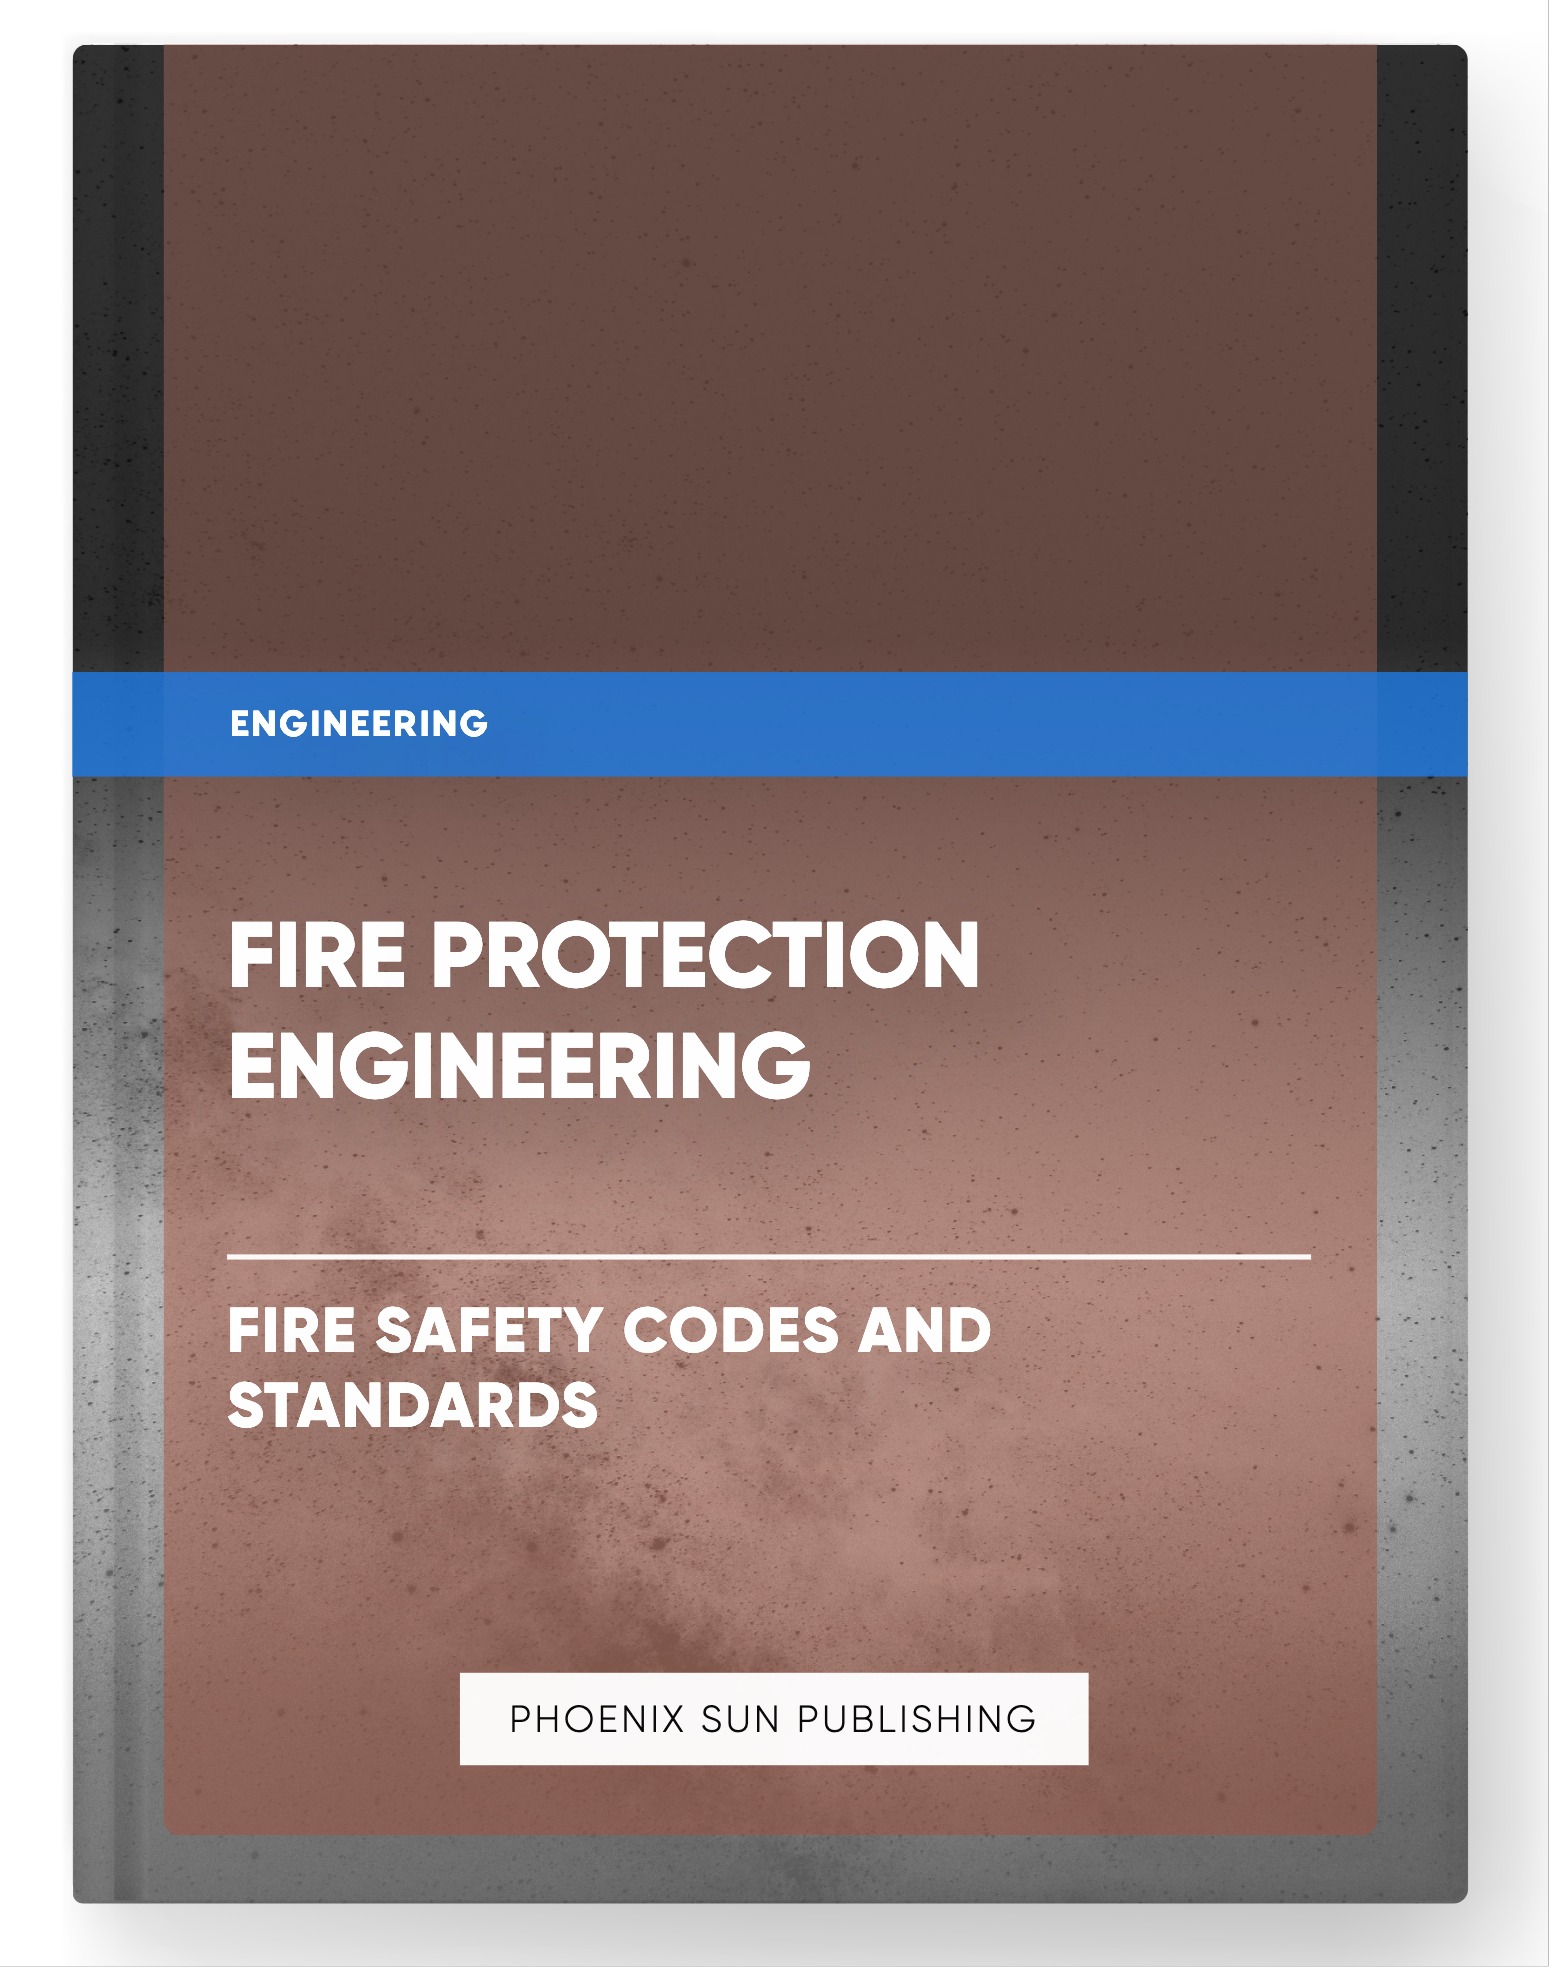 Fire Protection Engineering – Fire Safety Codes and Standards